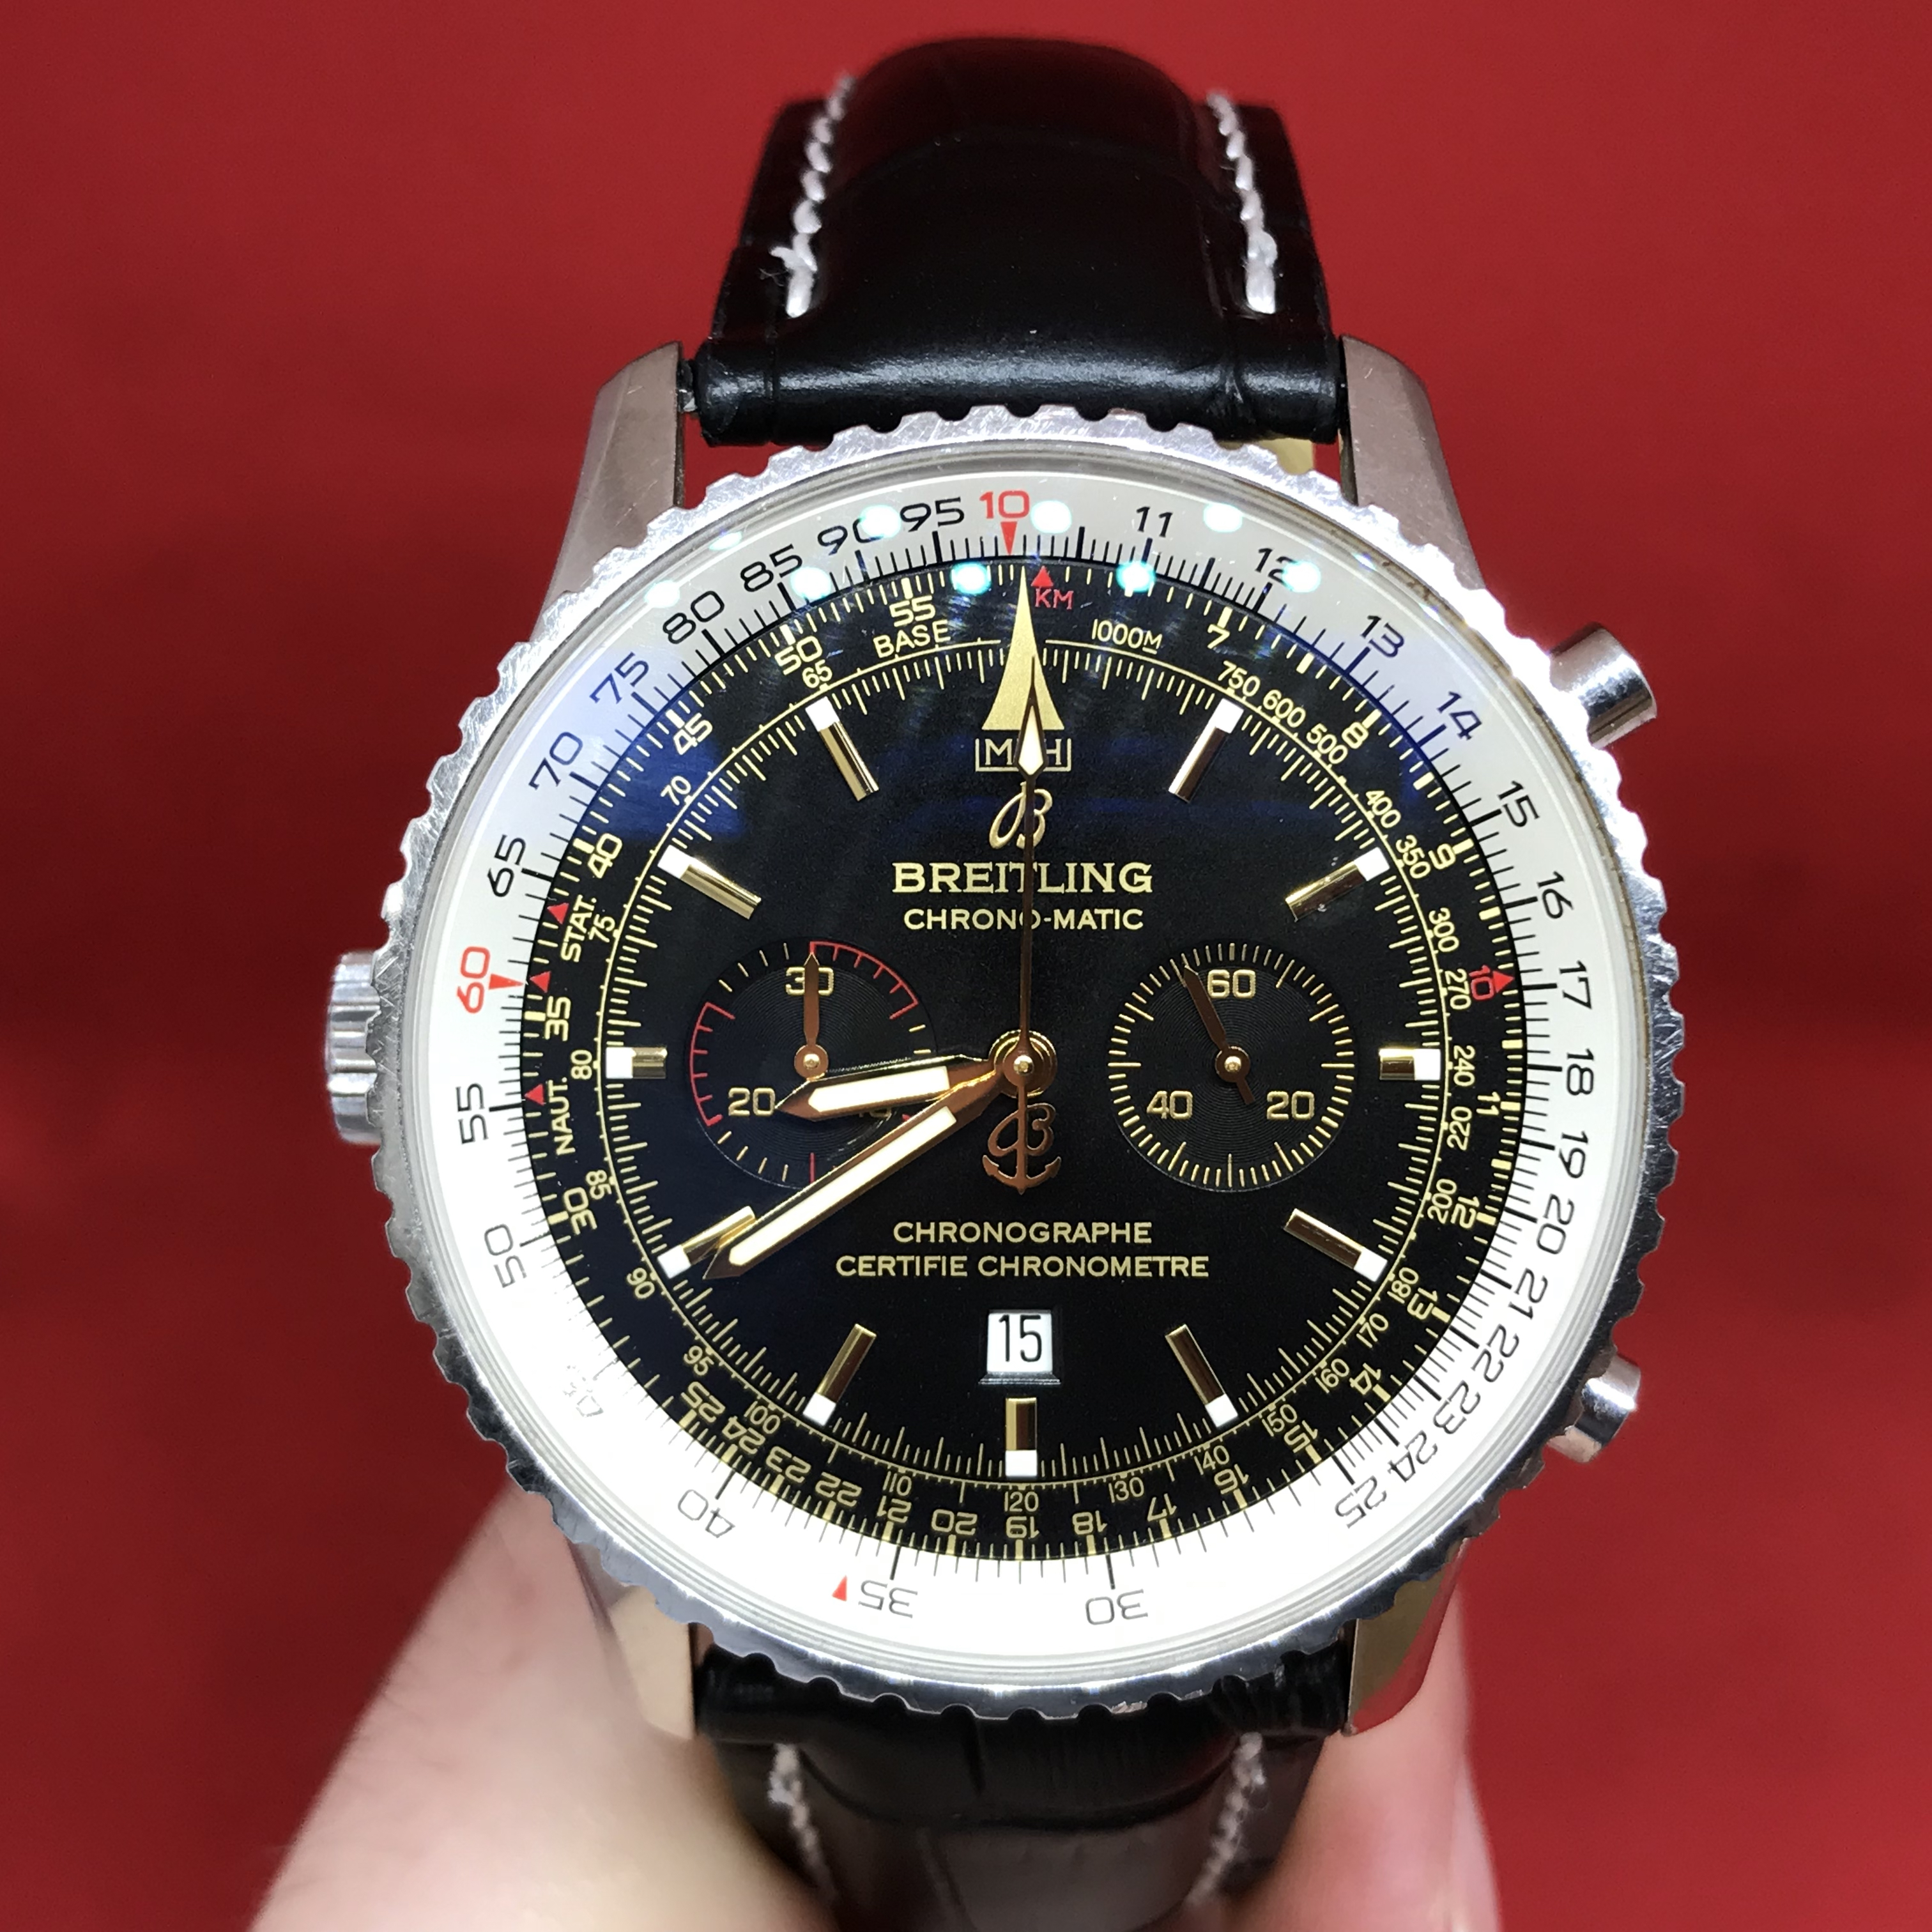 Breitling Navitimer Chrono-Matic Limited edition - Image 4 of 7